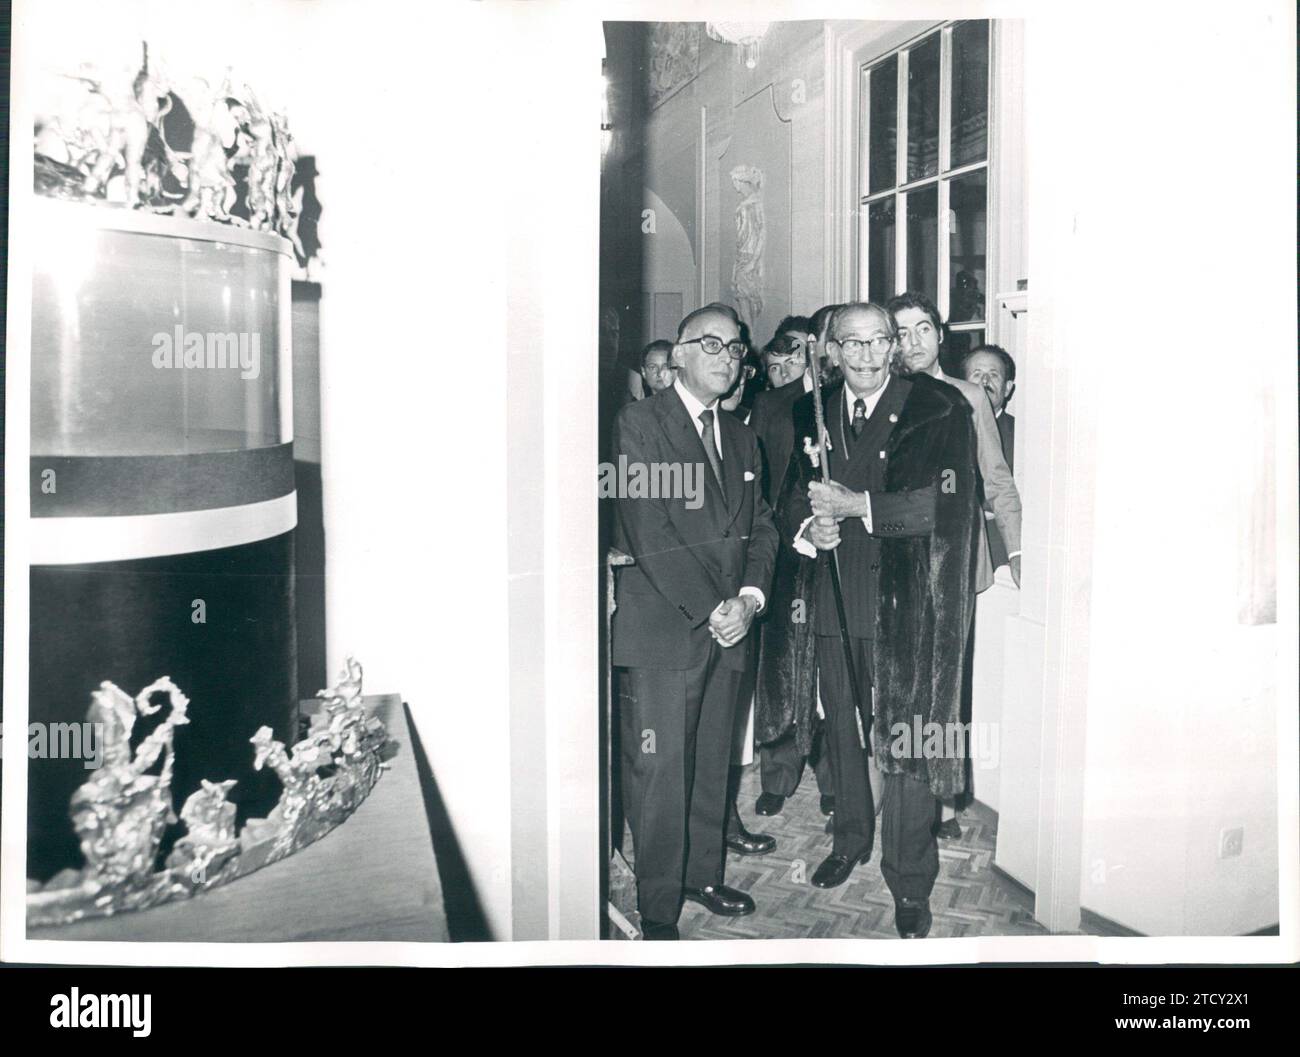 Figueras (Gerona), 9/29/1974. Inauguration of the Dalí Theater Museum. In the image, with the Minister of the Interior, José García Hernández. Credit: Album / Archivo ABC / Juan Cid Stock Photo